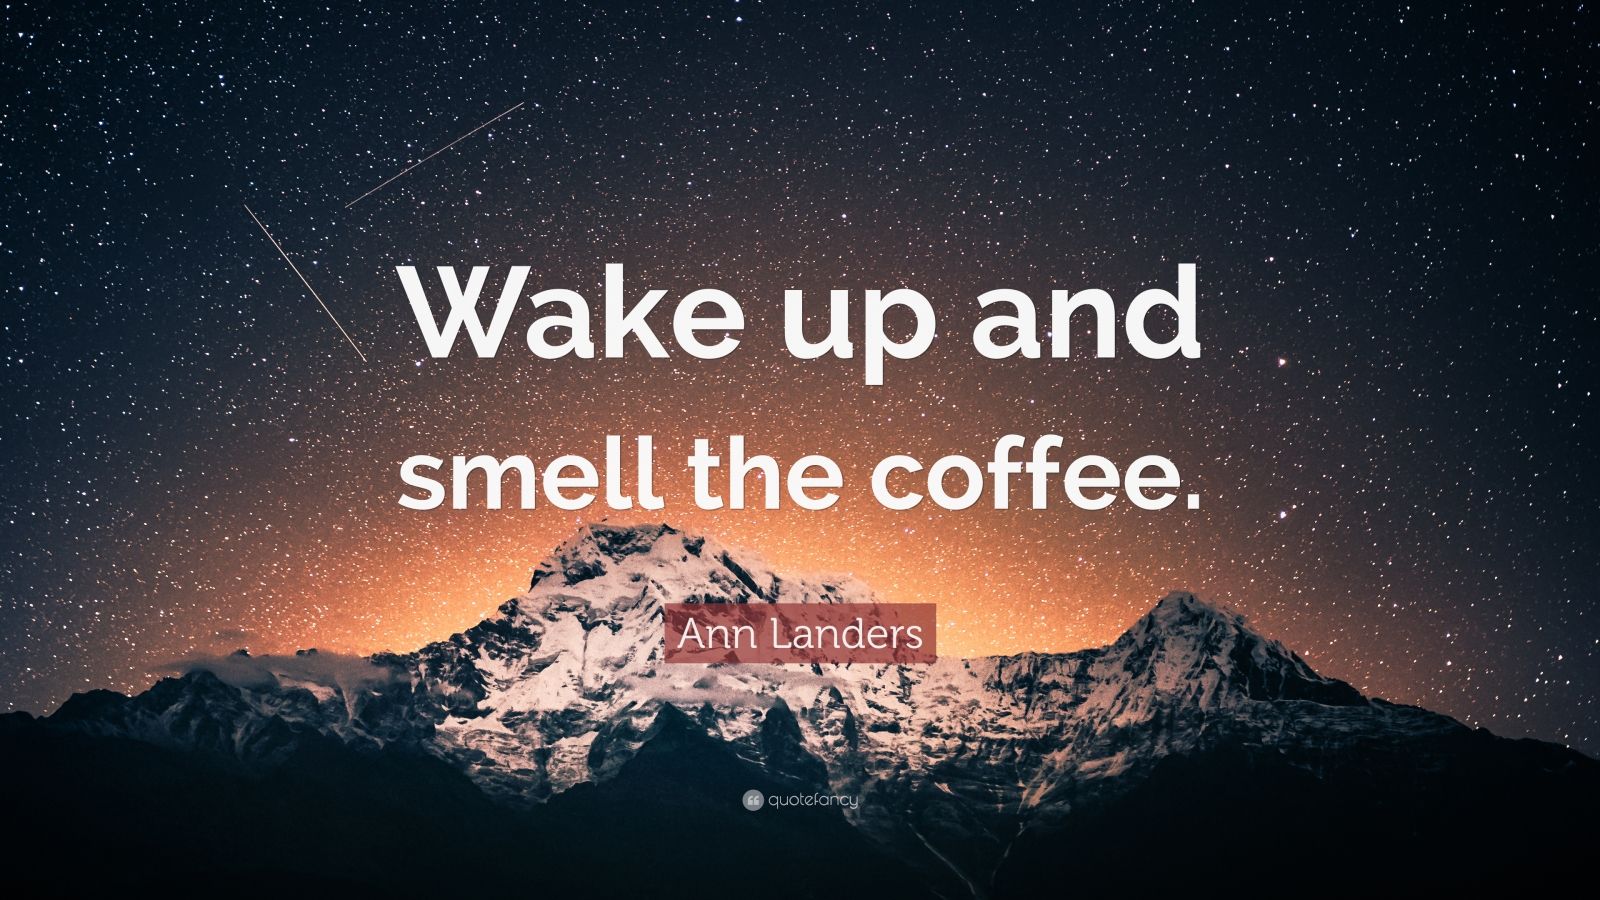 Ann Landers Quote: “Wake up and smell the coffee.” (11 wallpapers ...